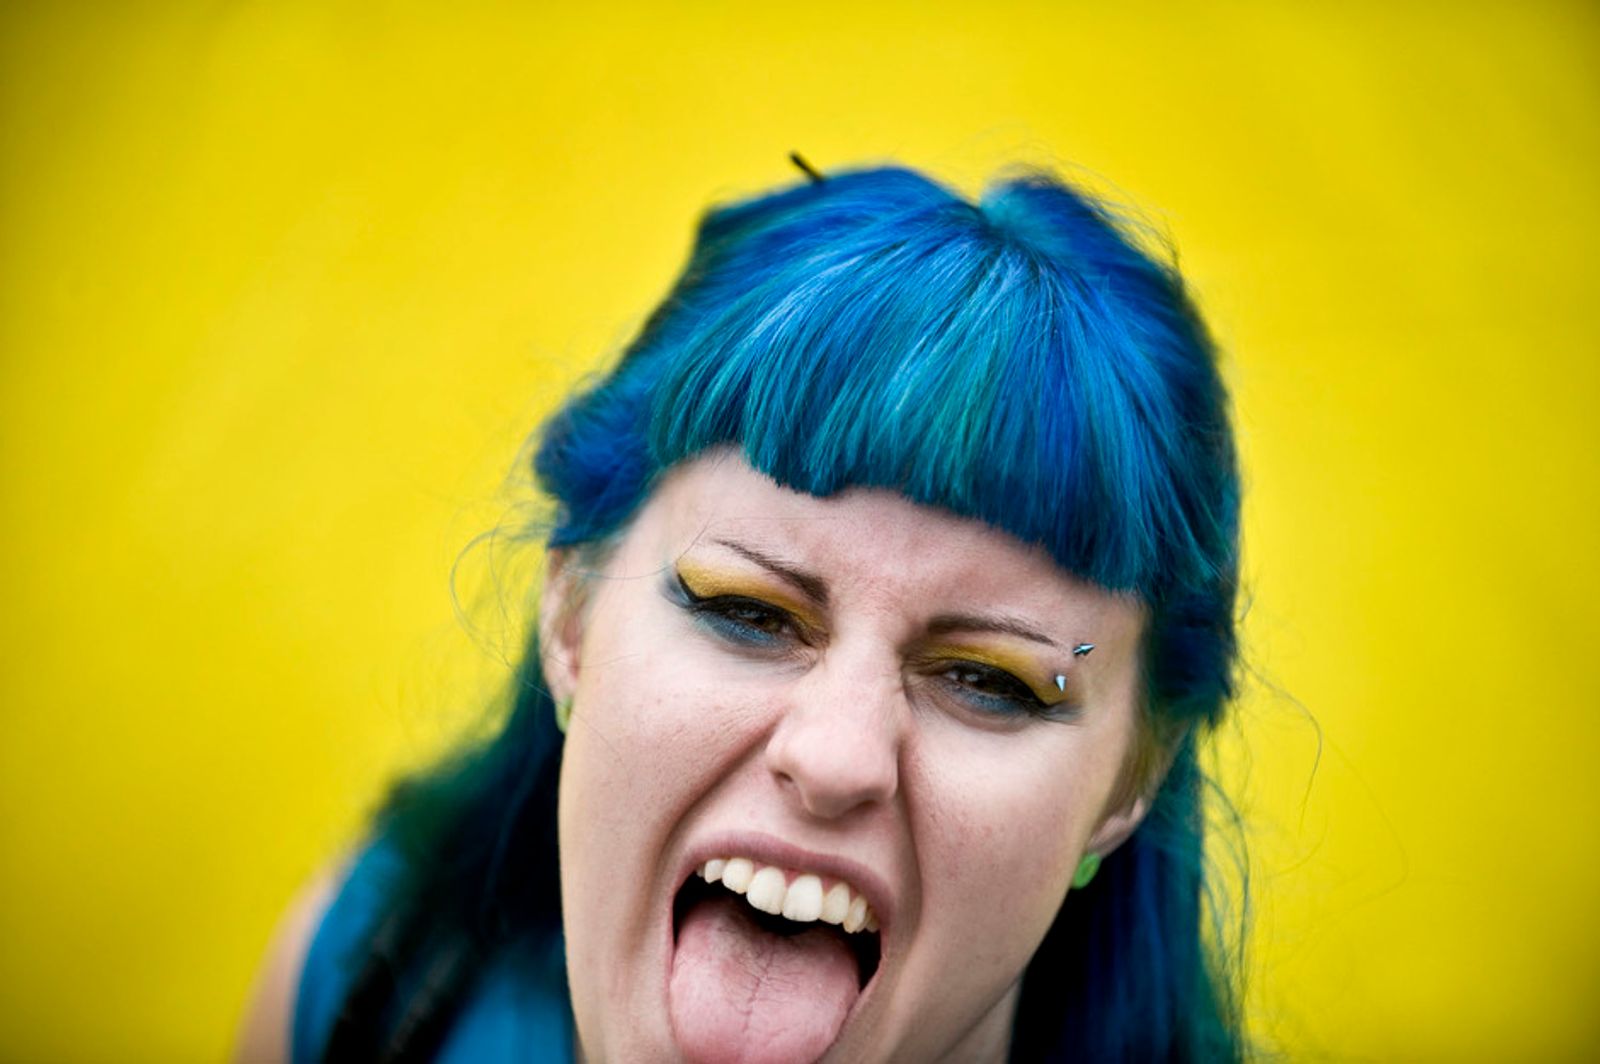 © Steven Edson - Woman with blue hair against yellow wall. Mansfield, MA